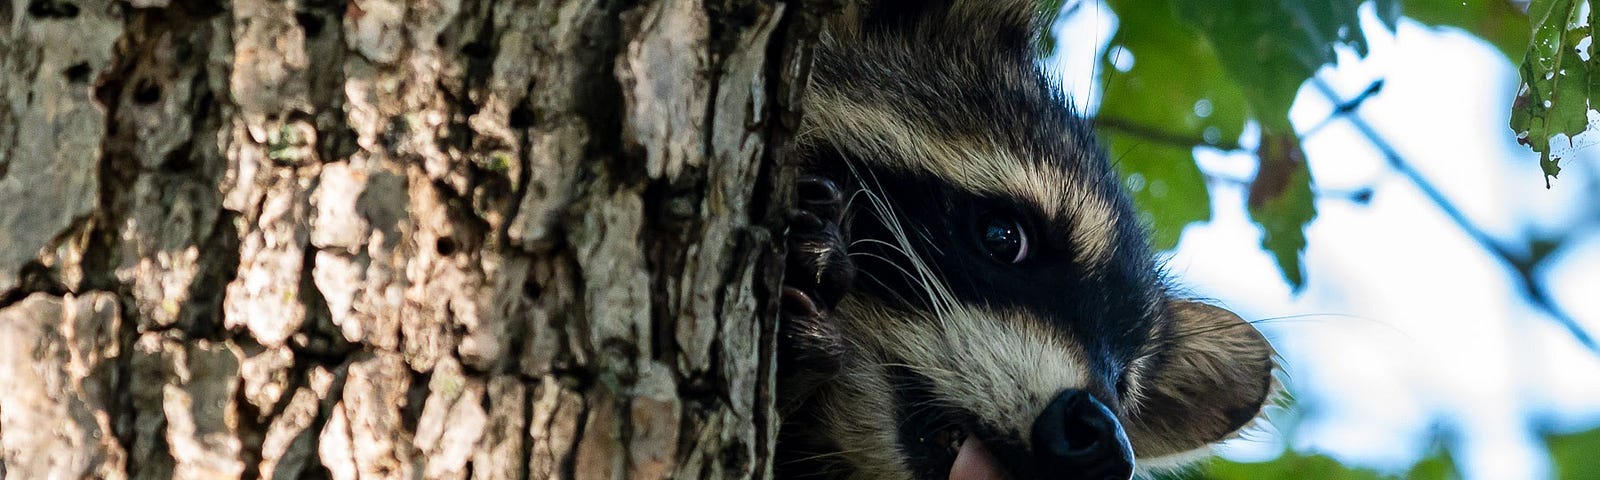 A baby raccoon peers out from behind a tree.